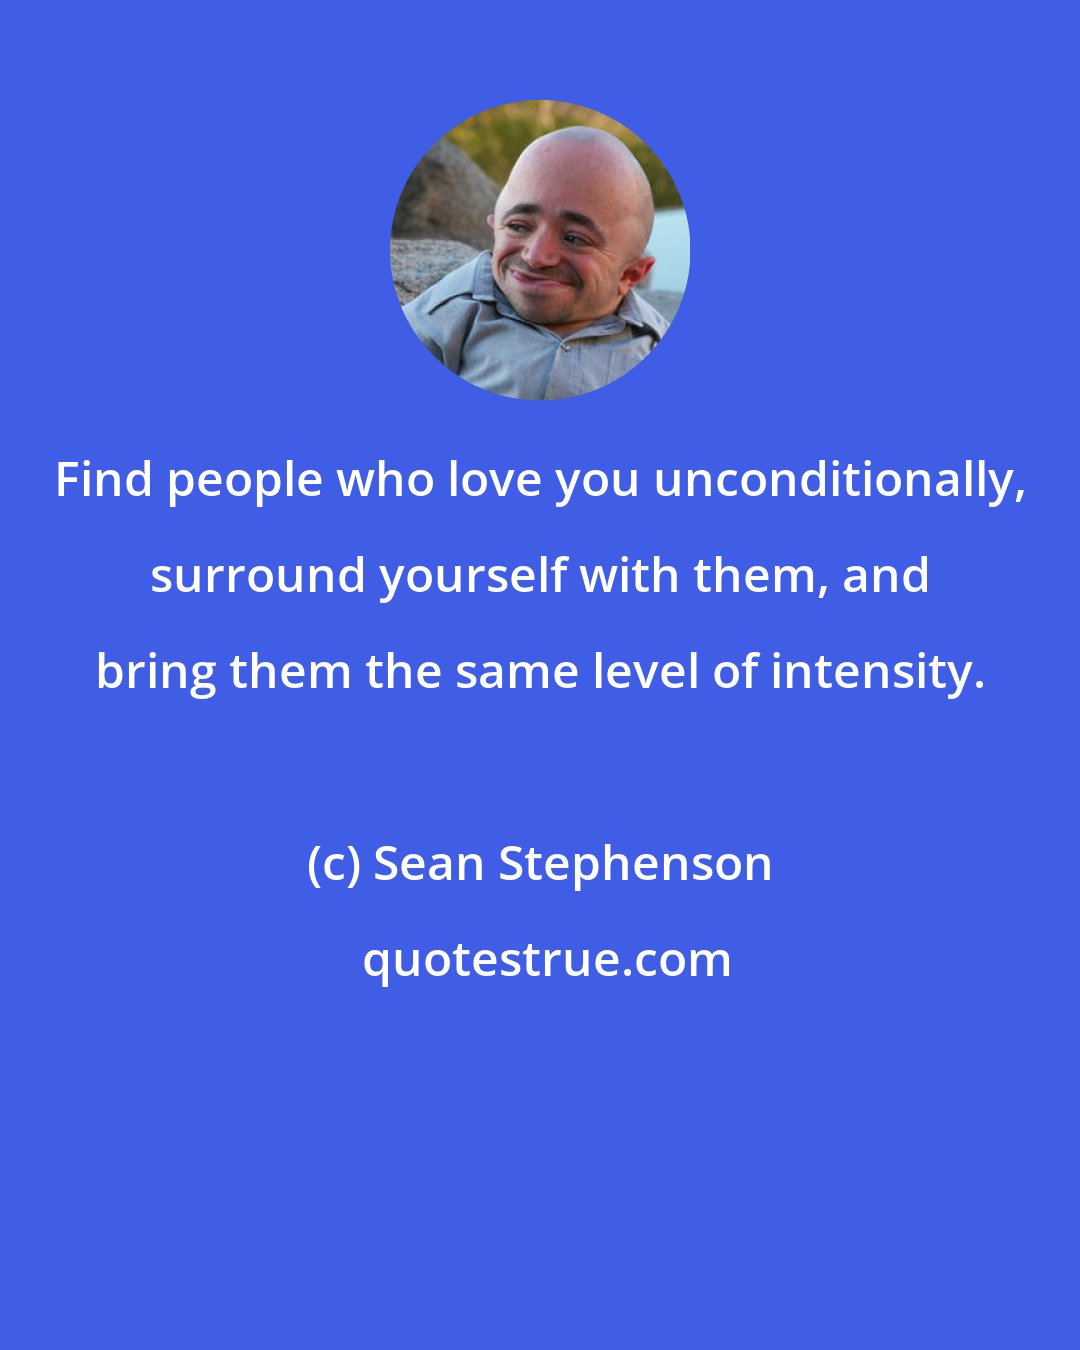 Sean Stephenson: Find people who love you unconditionally, surround yourself with them, and bring them the same level of intensity.